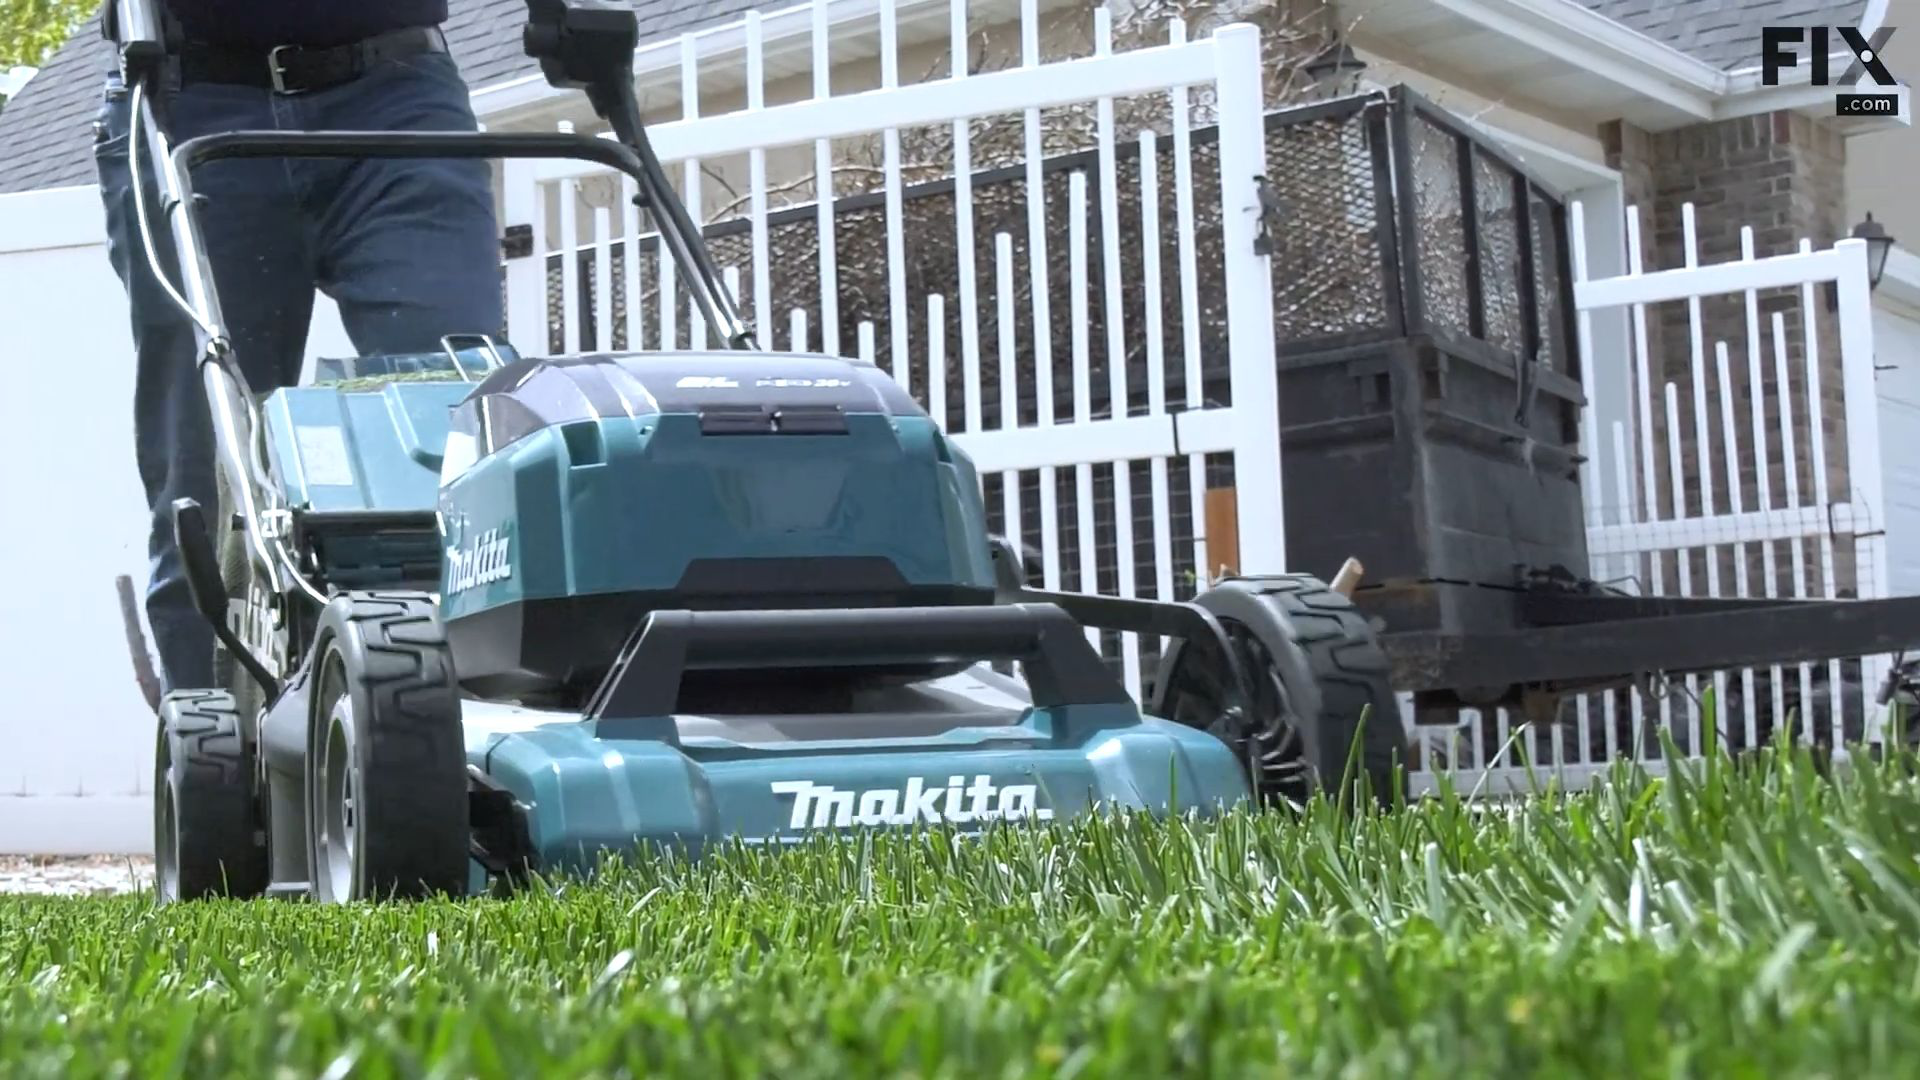 Man pushing a blue, battery-powered, self-propelled lawnmower through a front lawn of a suburban home with a white fence